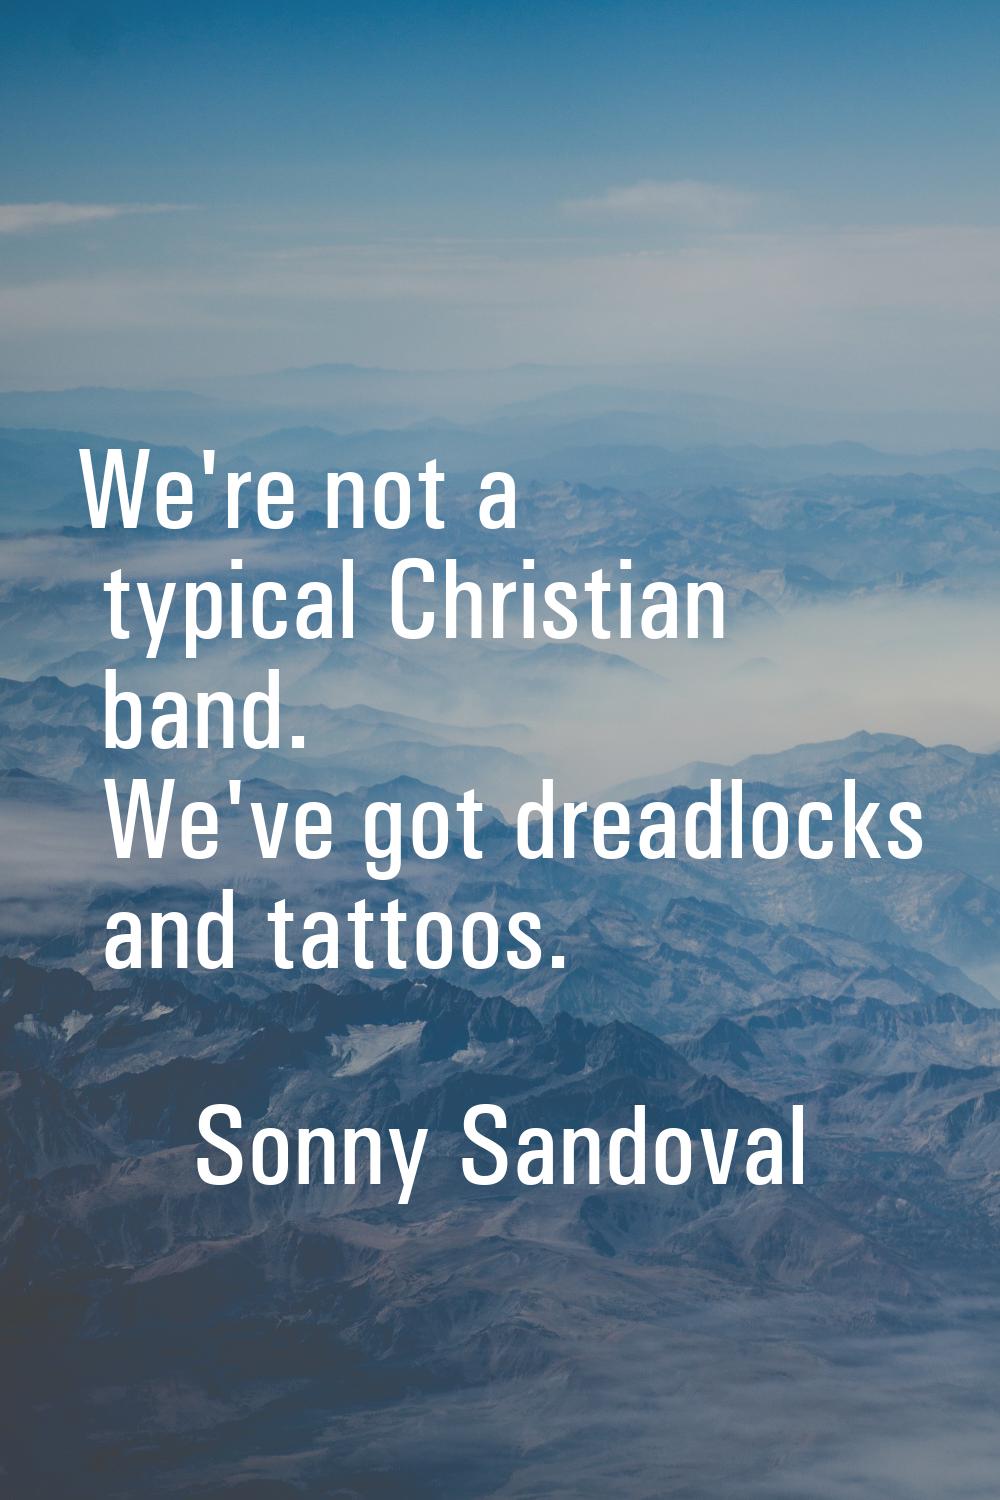 We're not a typical Christian band. We've got dreadlocks and tattoos.